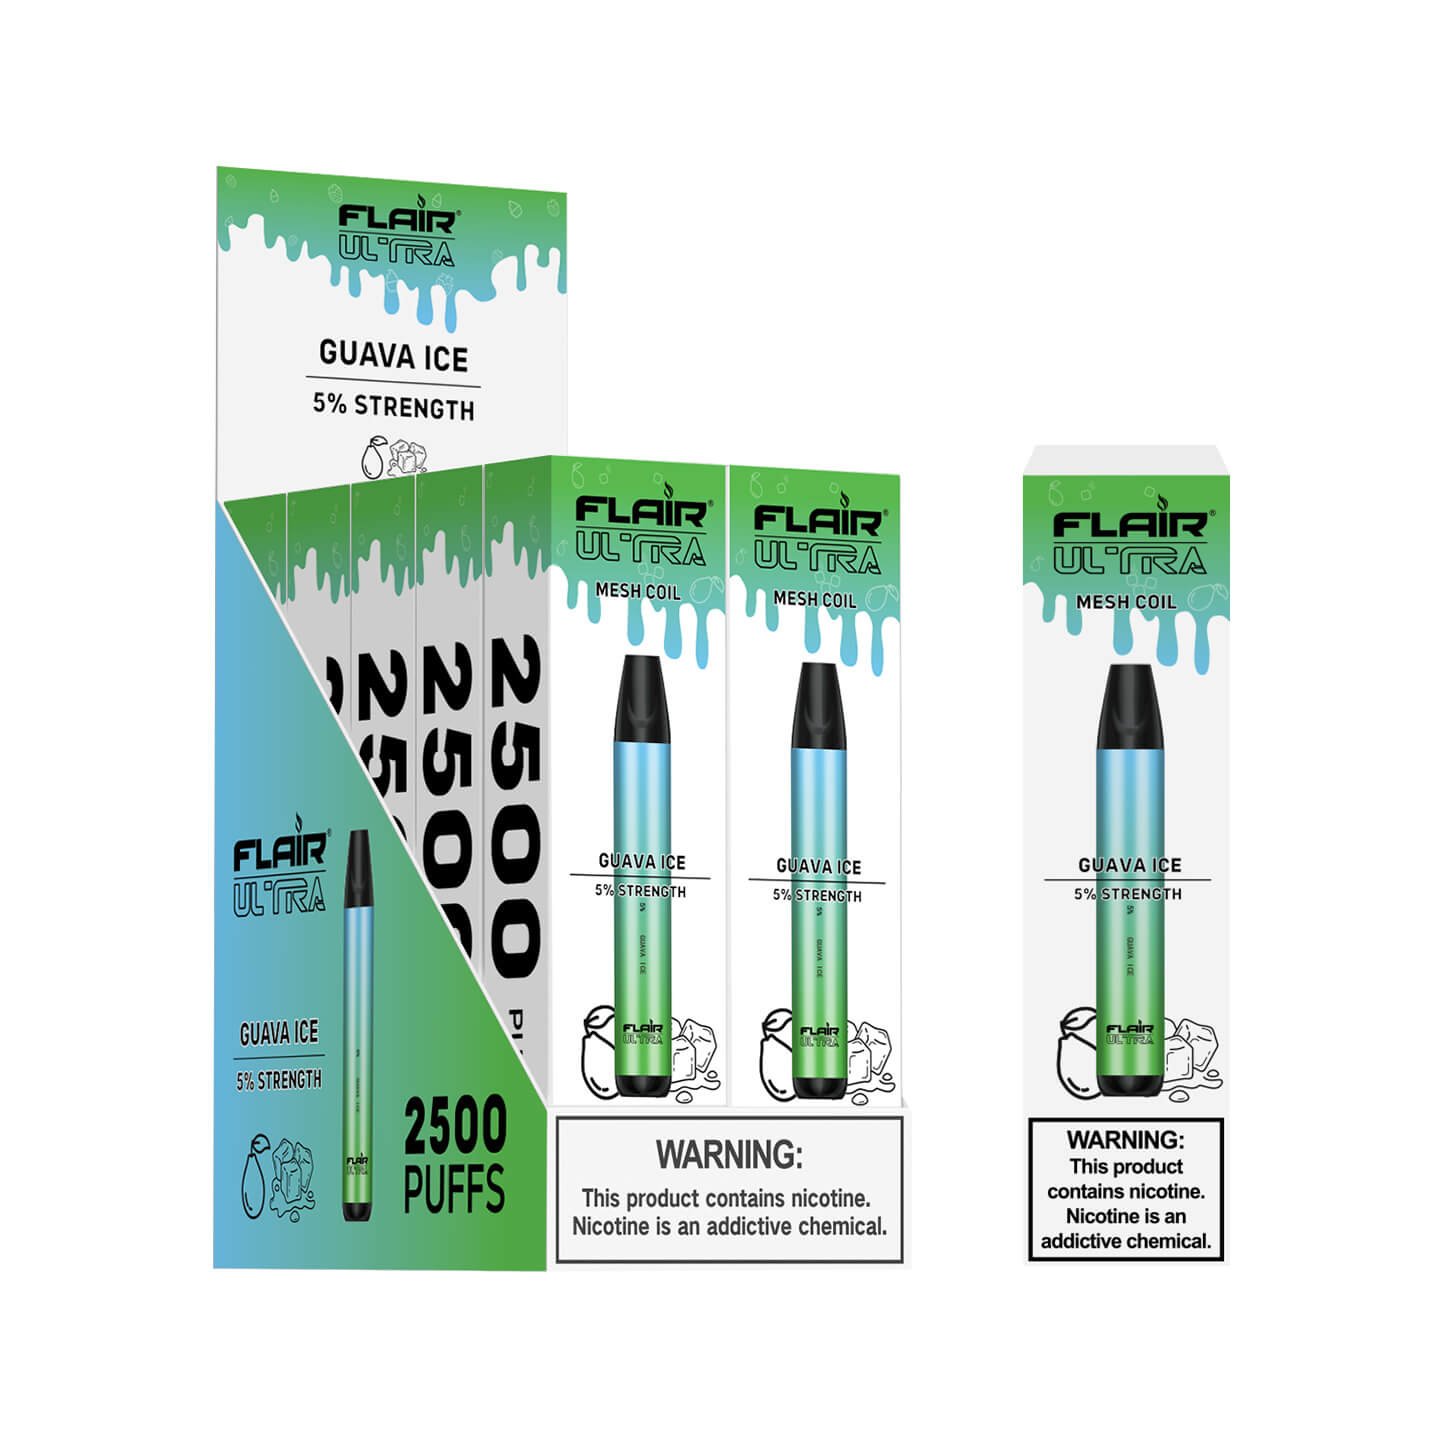 Flair Ultra Disposable Devices (Banana Ice - 2500 Puffs) - VapeShire